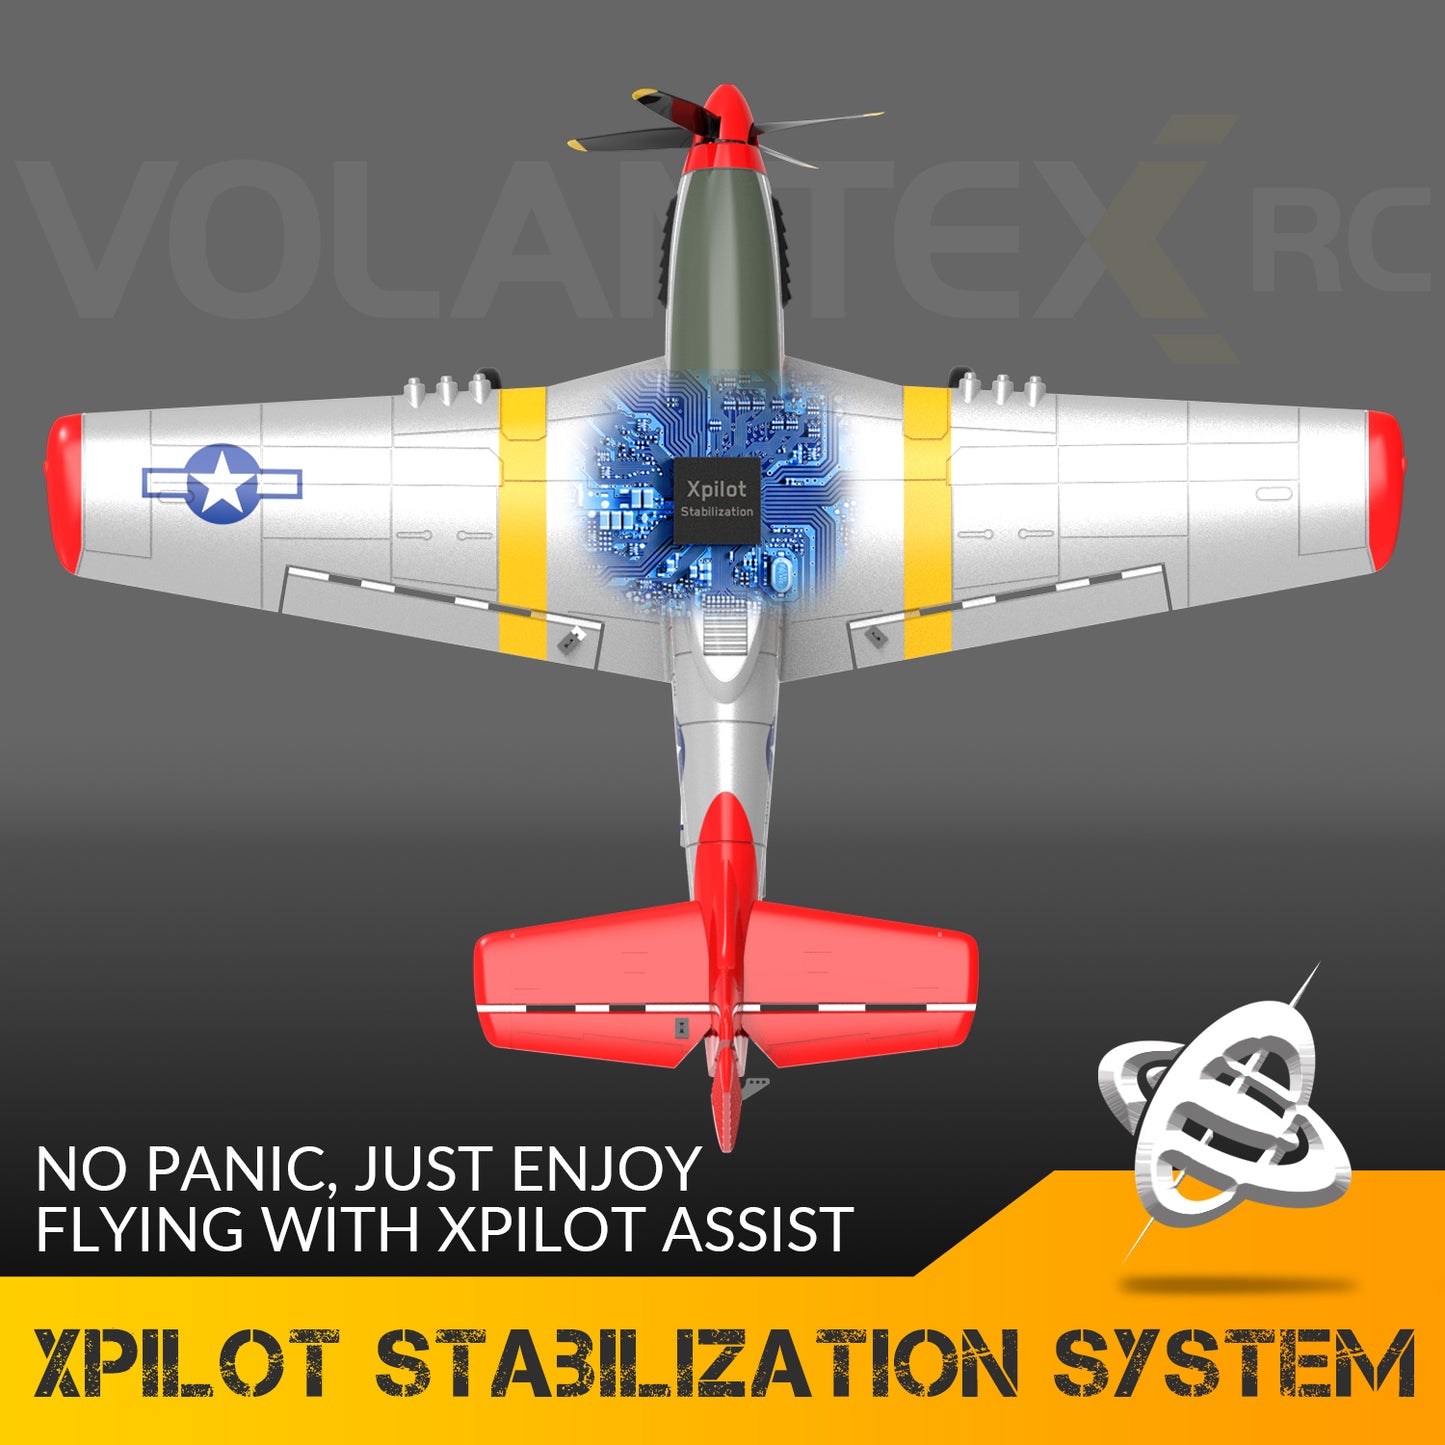 New Upgrade Volantex P51D Red Mustang RC Plane One-key Aerobatic 4-Ch Plane Aircraft W/Xpilot Stabilization System (761-5 )